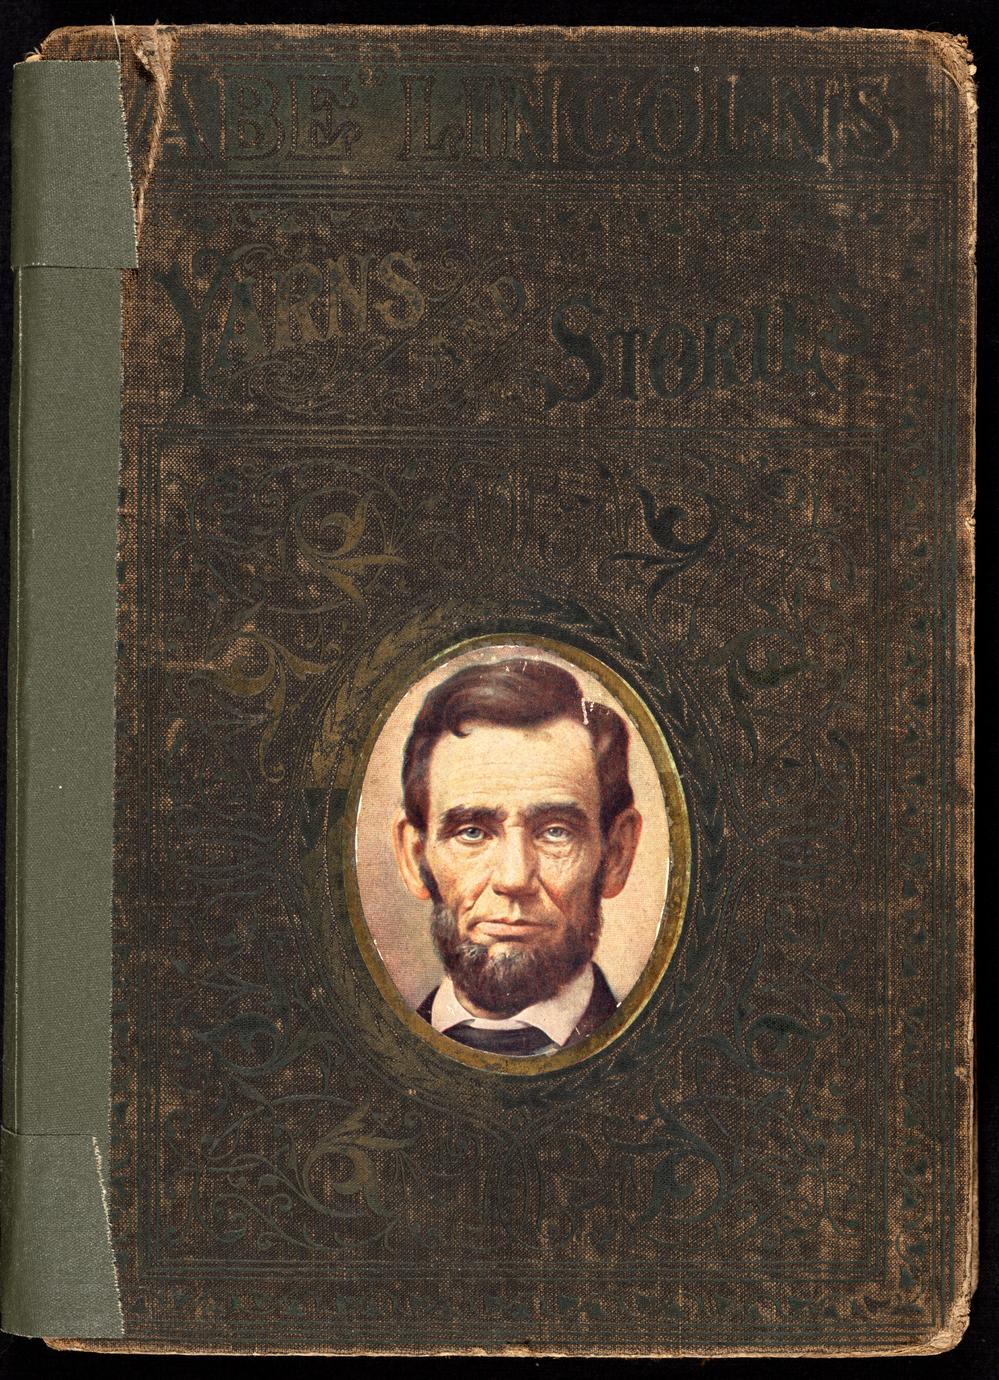 Abe Lincoln's yarns and stories : a complete collection of the funny and witty anecdotes that made Lincoln famous as America's greatest story teller